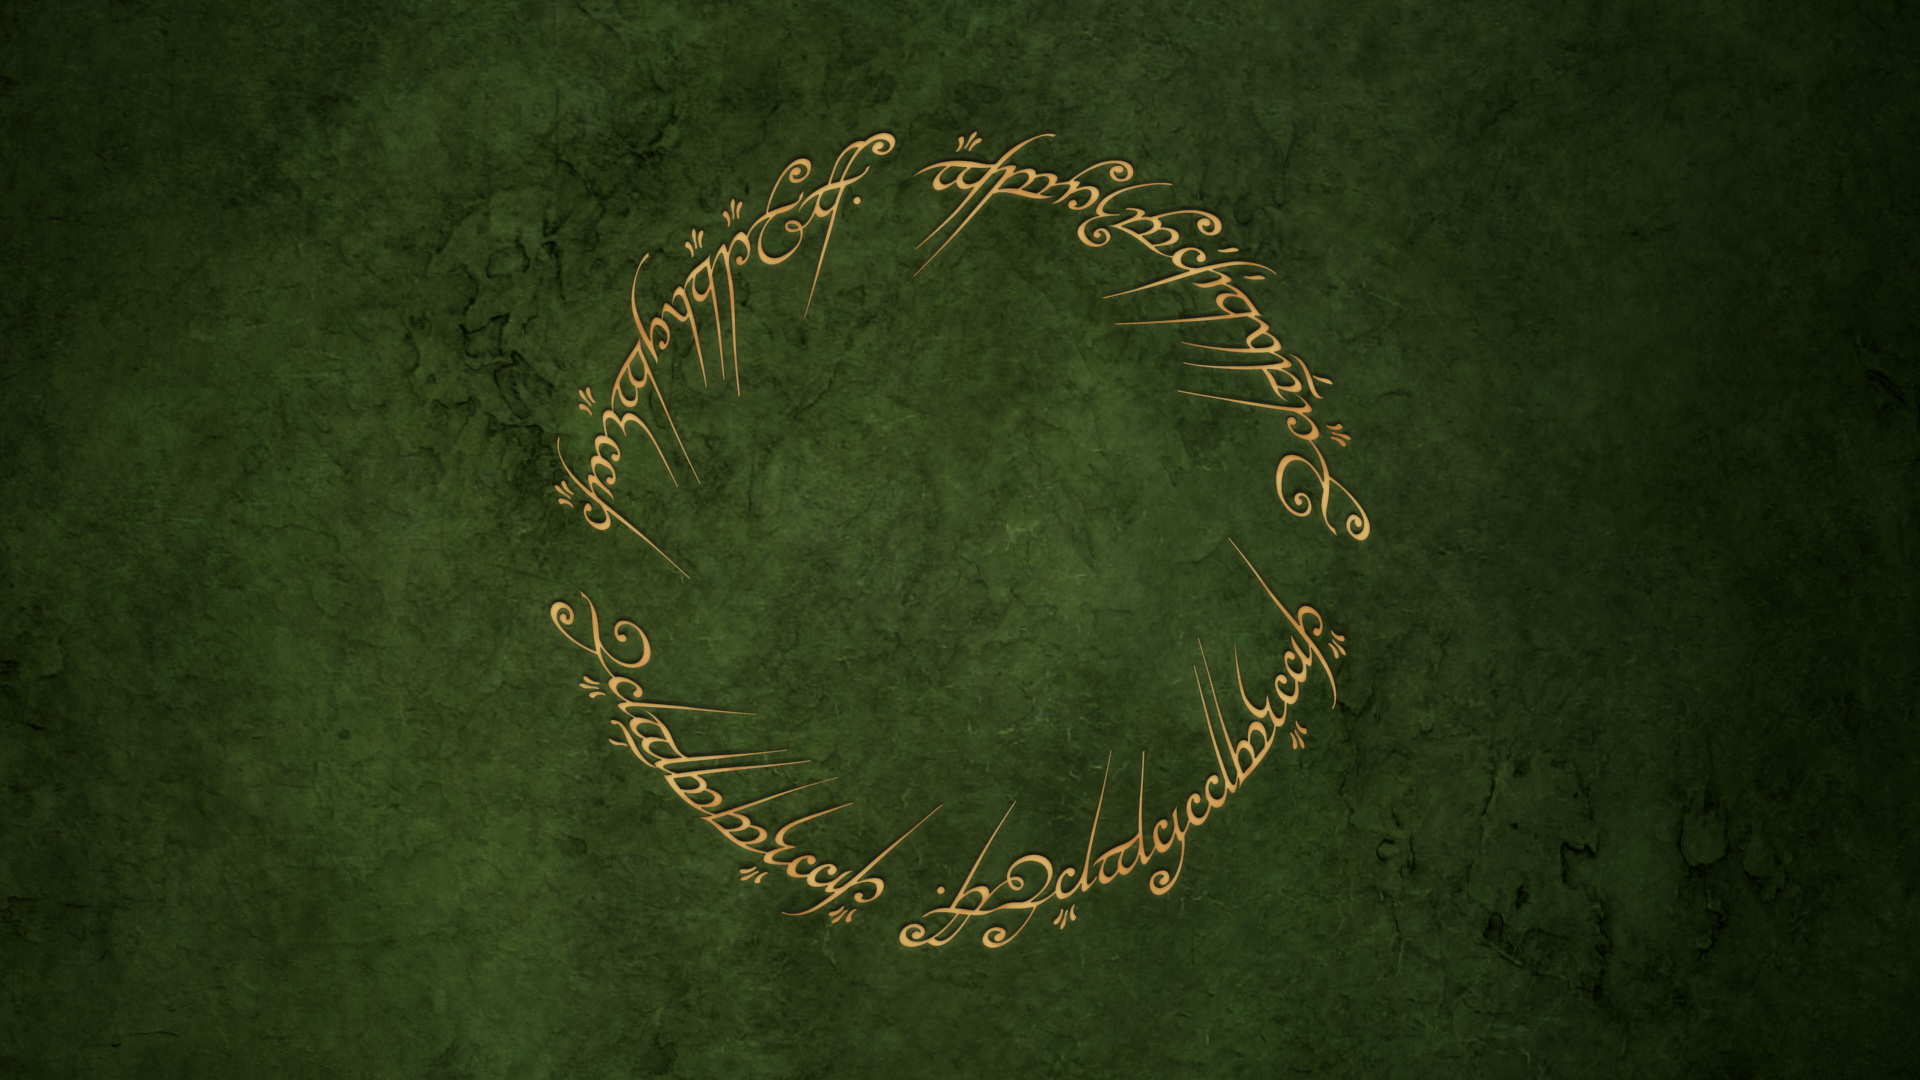 The Lord of the Rings - desktop wallpaper